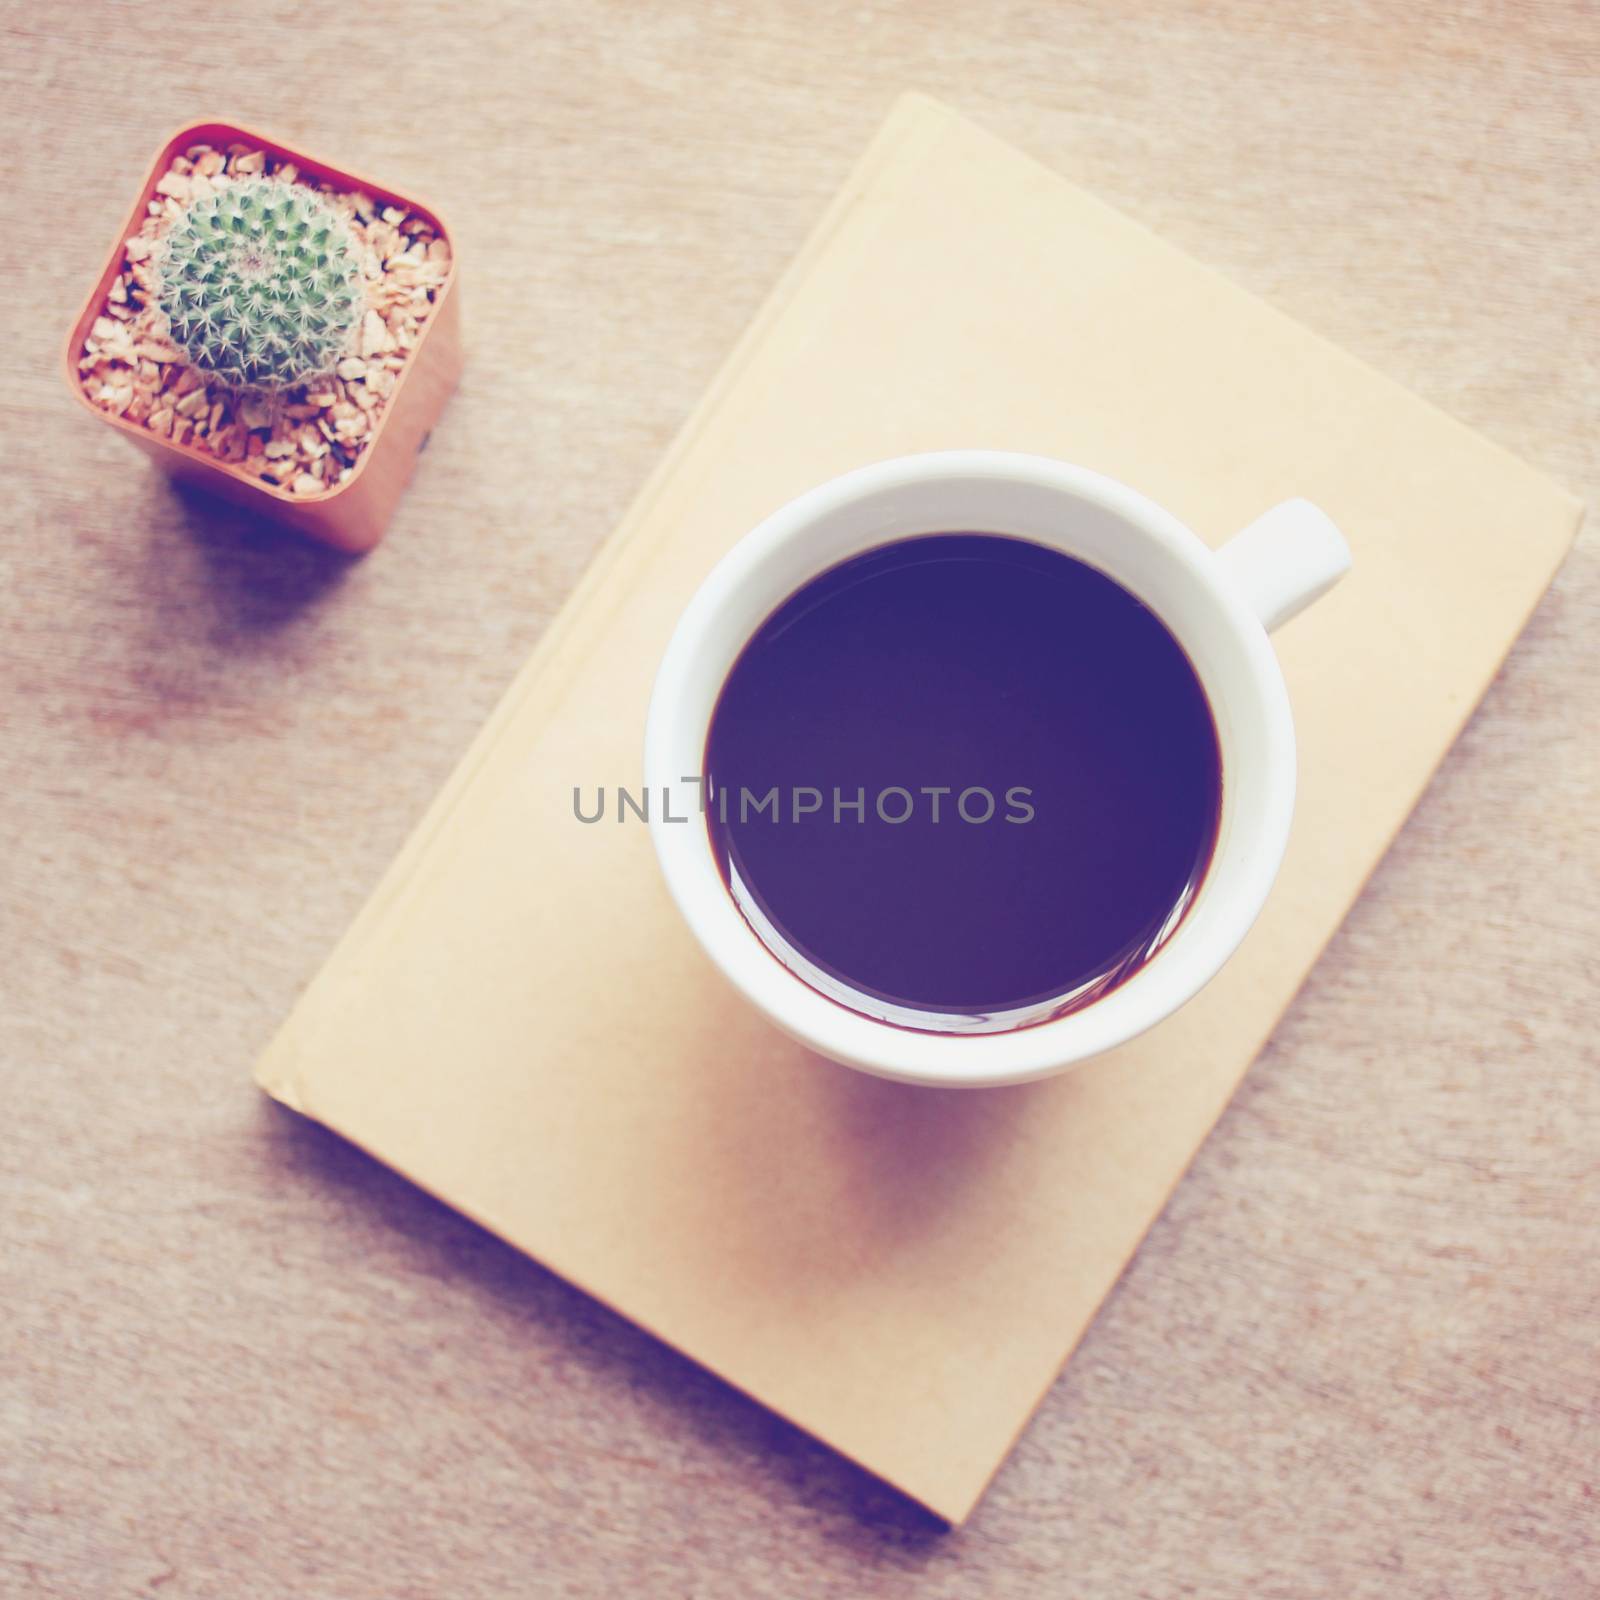 Black coffee on notebook and cactus with retro filter effect by nuchylee